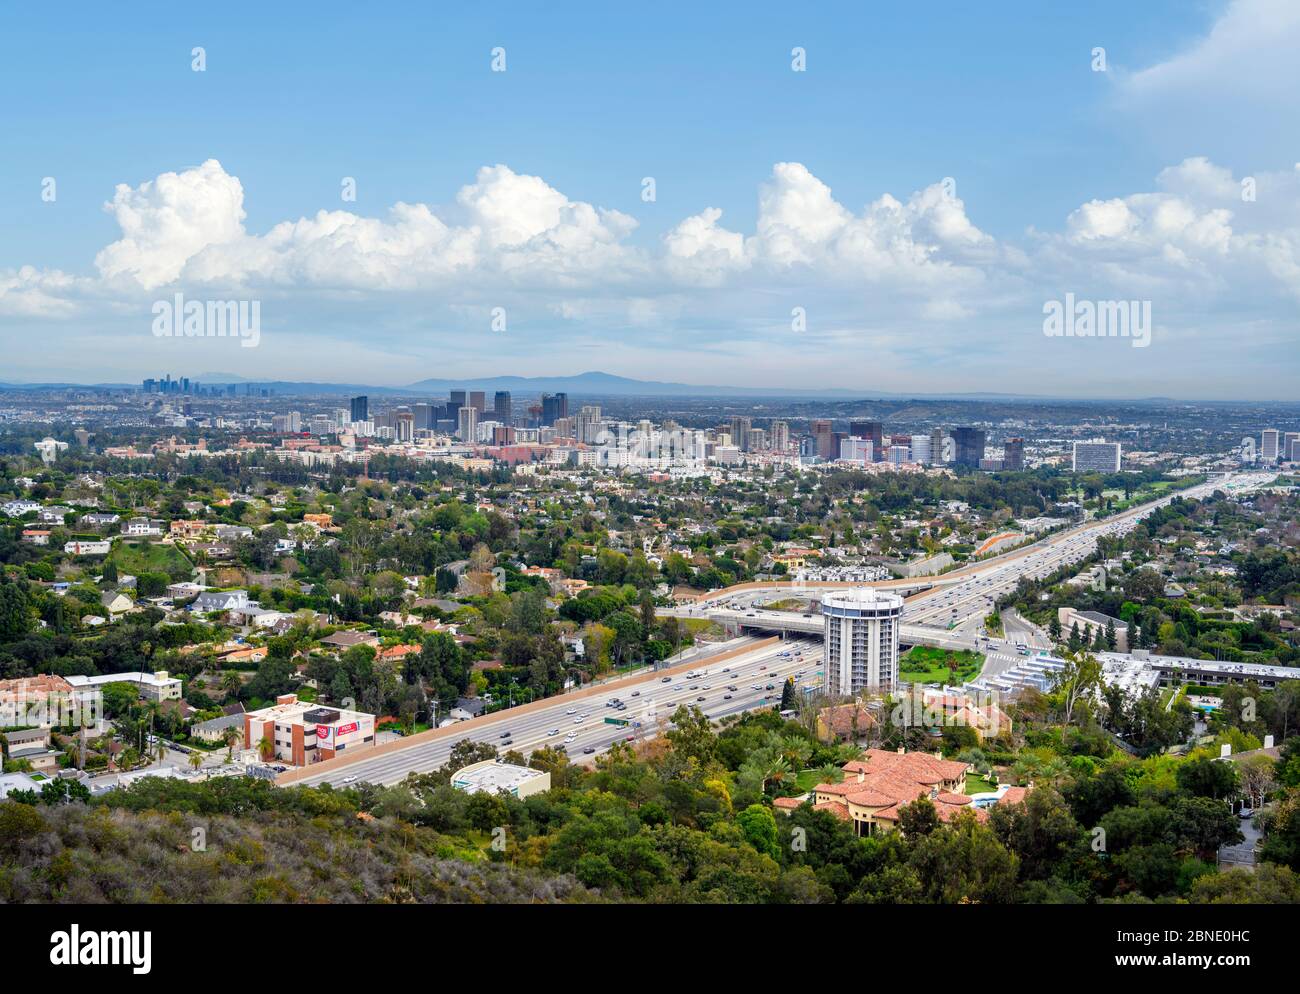 Skyline from The Getty Center with the San Diego Freeway (I-405) in the foreground, Los Angeles, California, USA Stock Photo